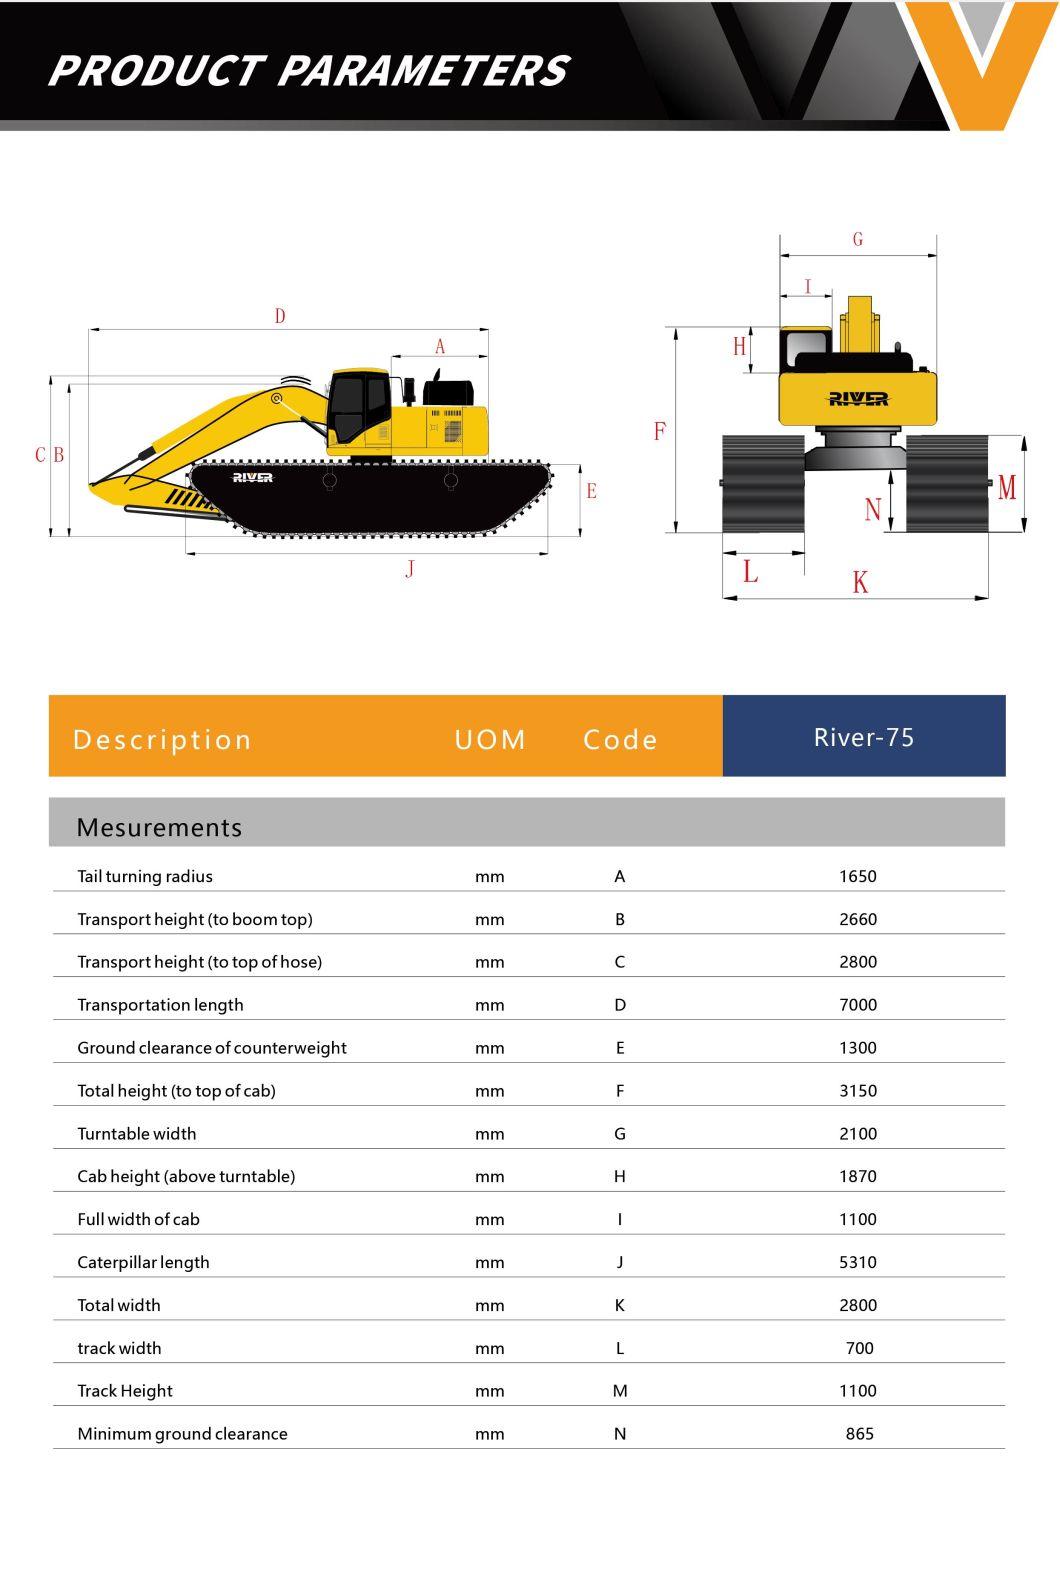 Hot Sale Dredging Equipment Swamp Buggy Used Amphibious Floating Excavator for Deep Water Quality Guarantee